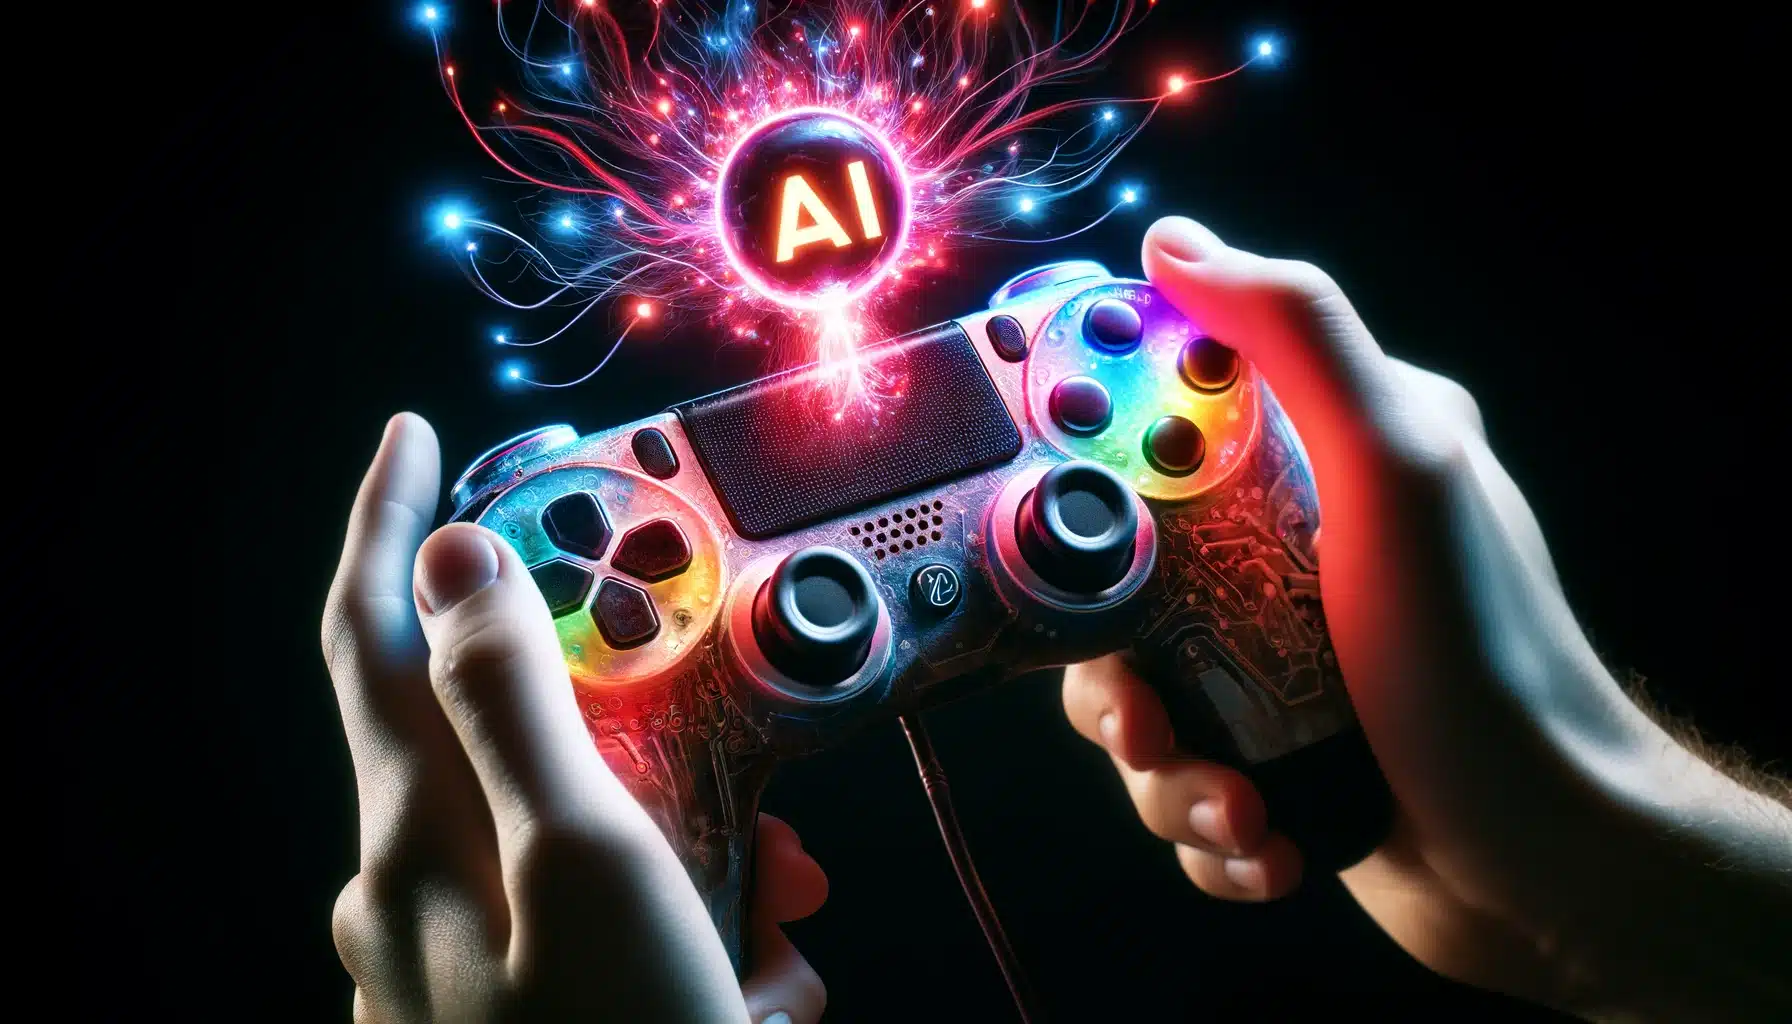 Retro video game controller for "AI Game" with glowing AI symbol and holographic code.